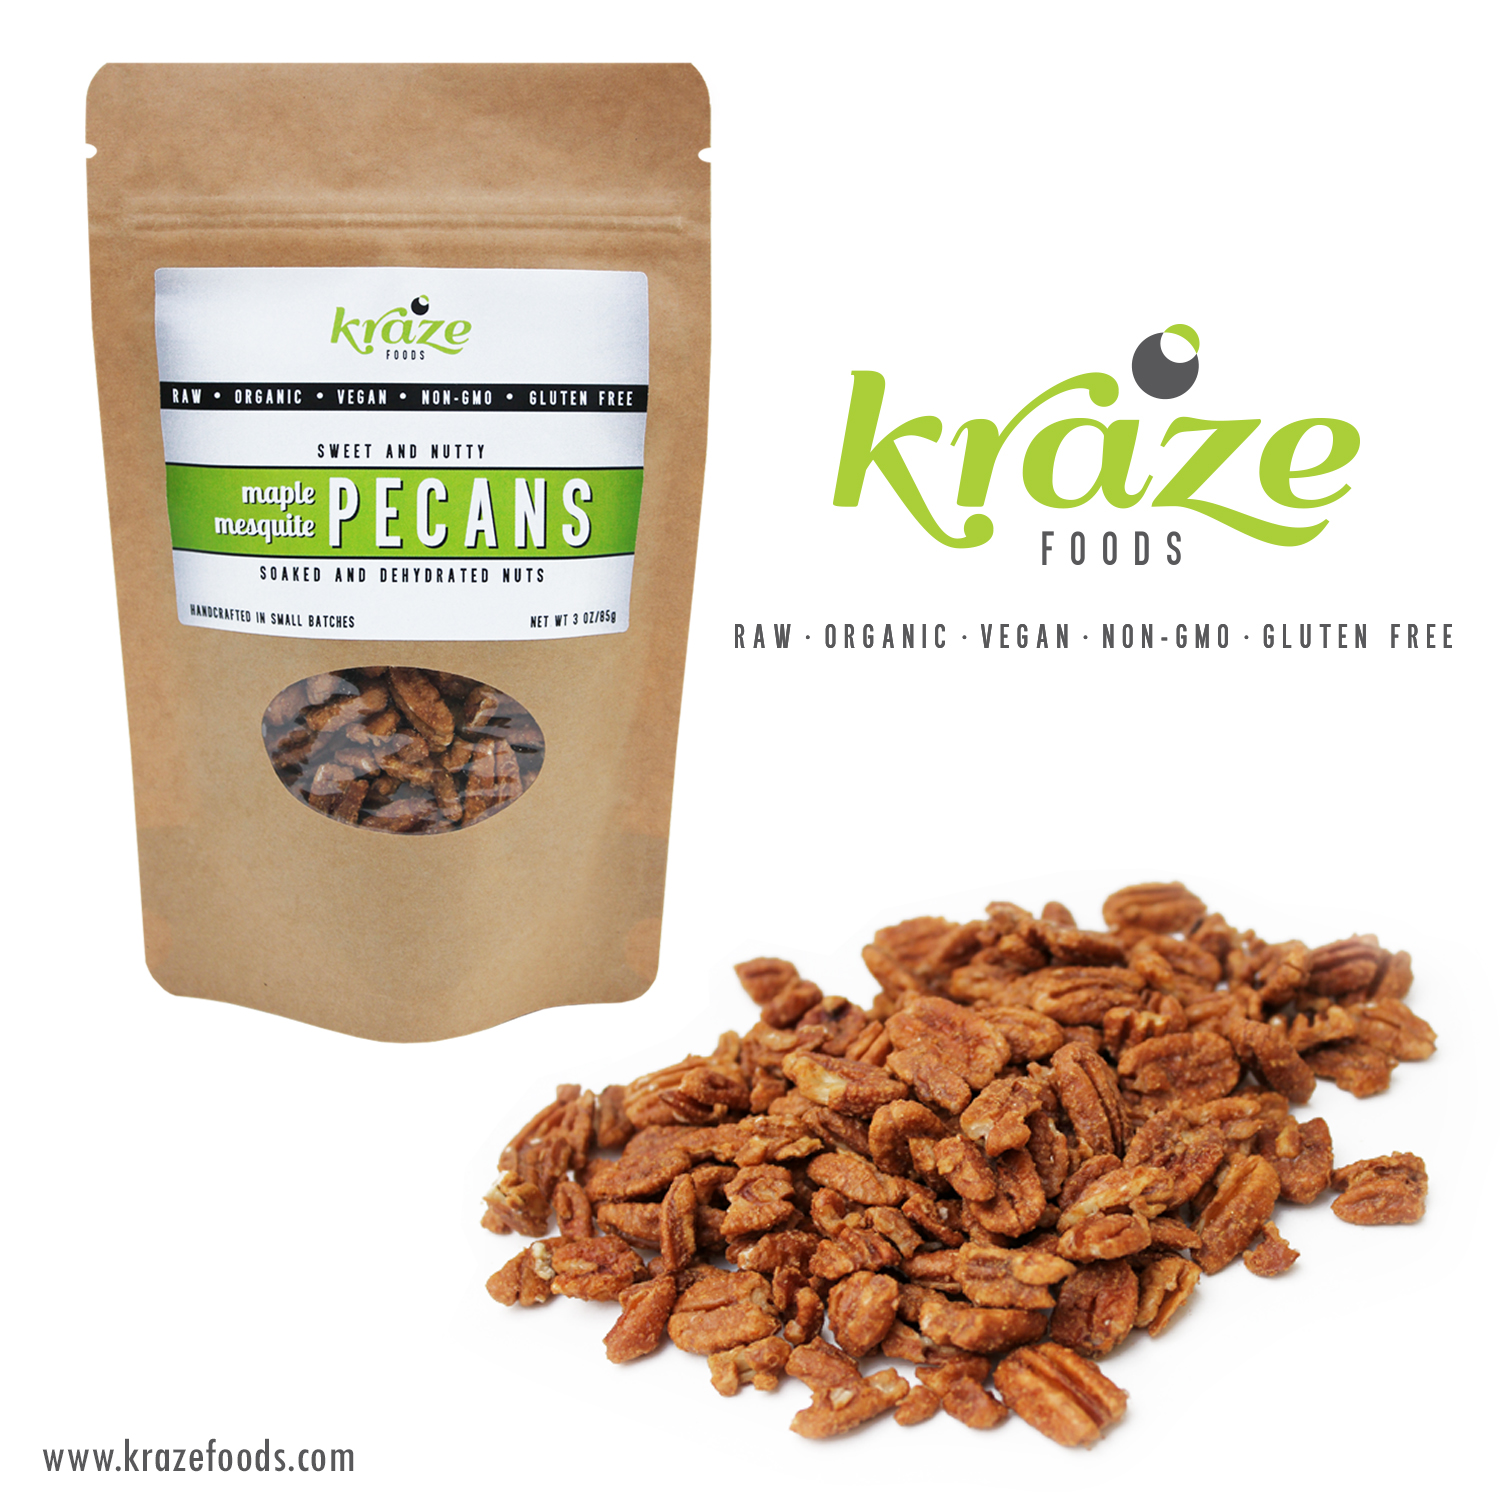 Kraze Foods Maple Mesquite Pecans are sweet and nutty!